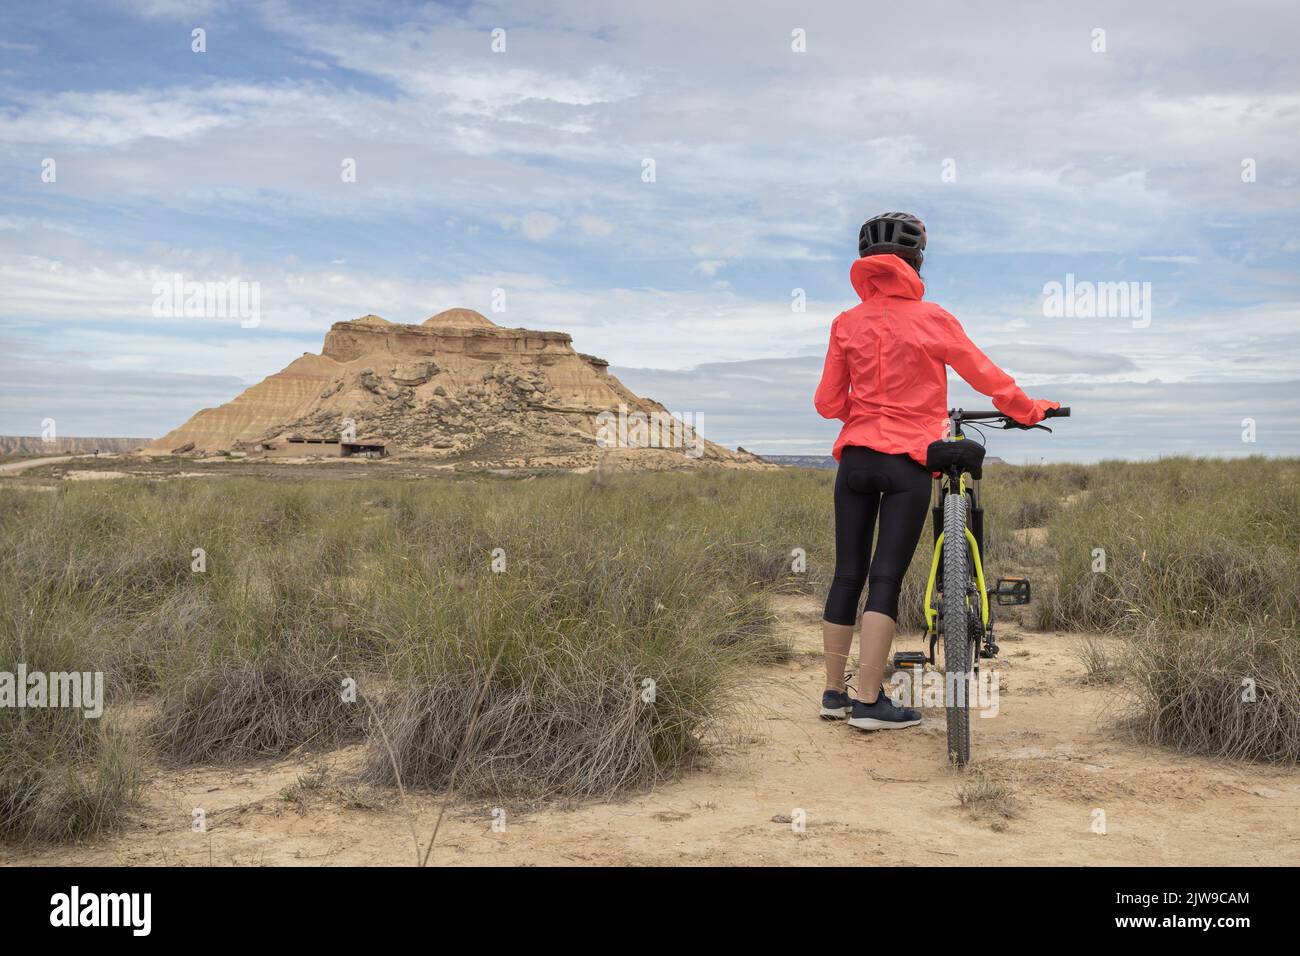 Young woman mountain bike cyclist in Badlans of Navarre (Bardenas Reales de Navarra) dessert in the middle of Spain. Stock Photo